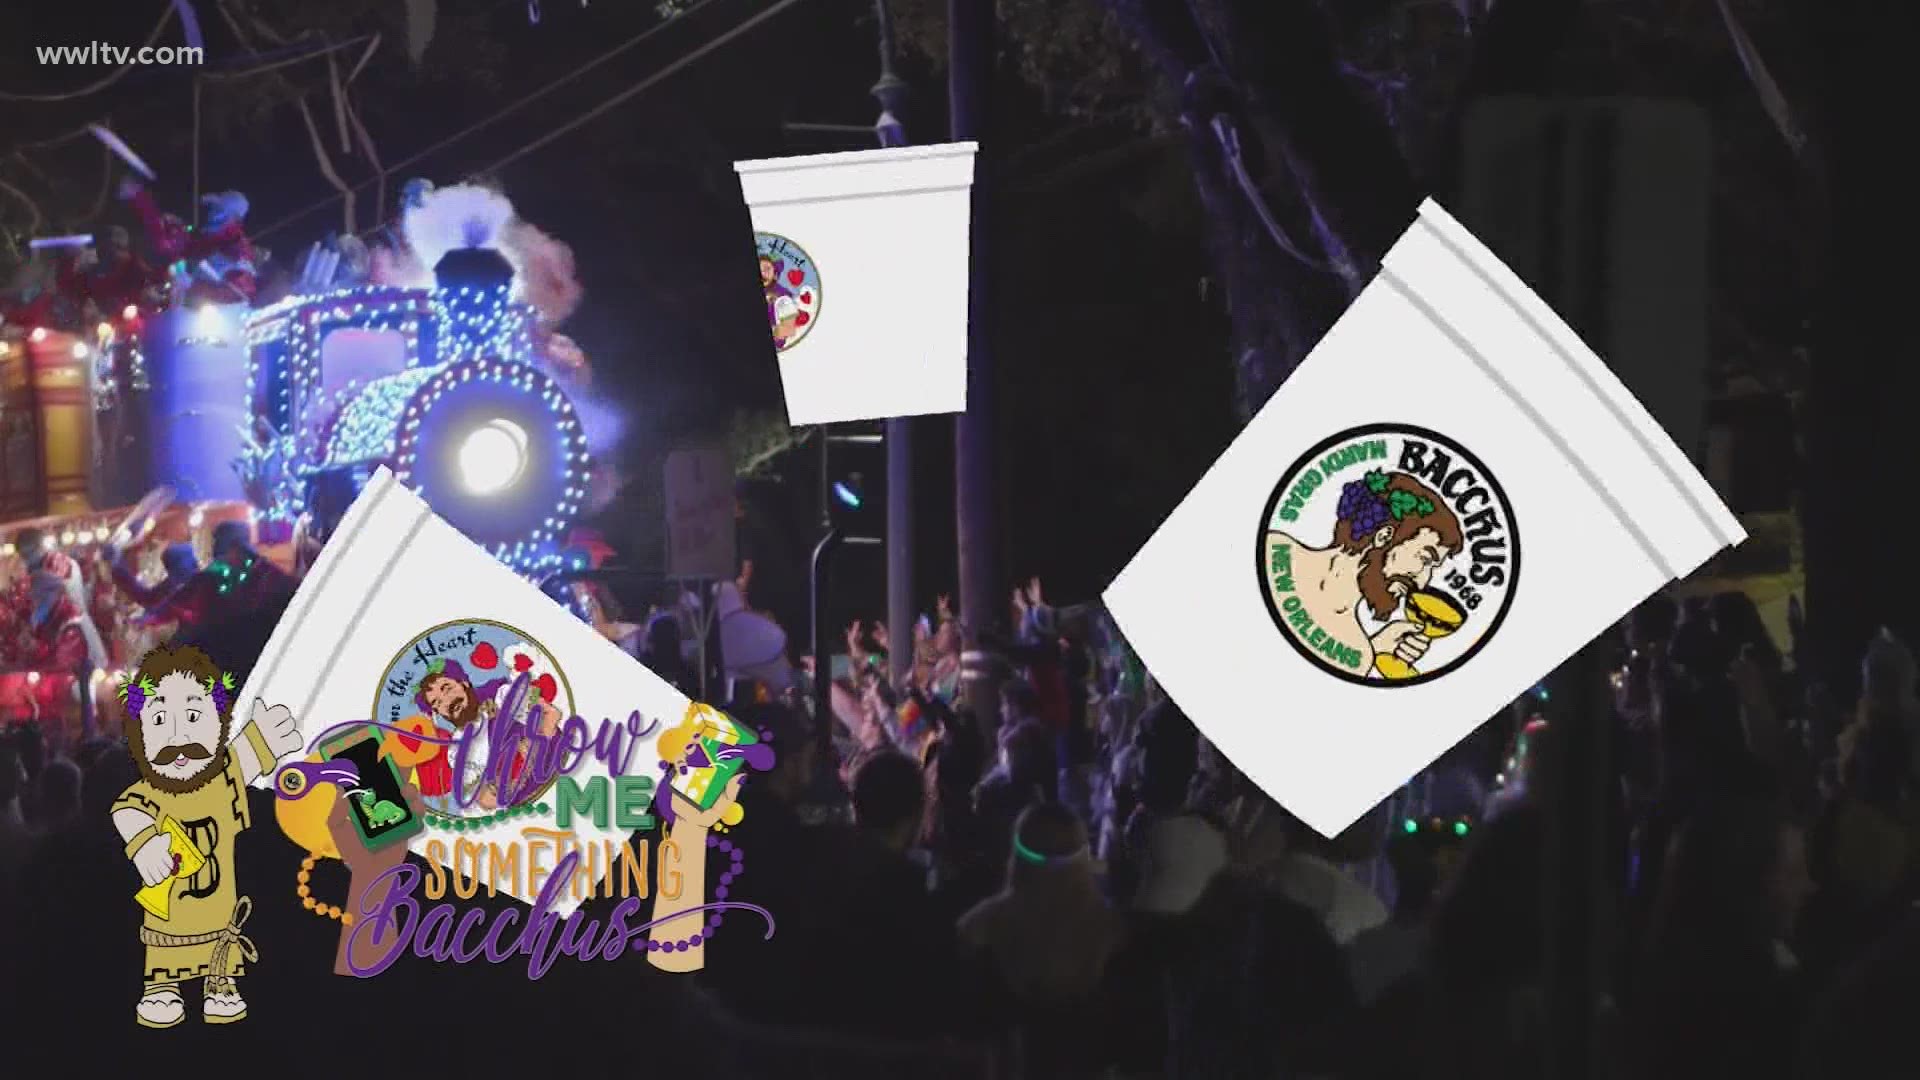 The superkrewe known for its Carnival innovations will introduce an app with a virtual parade and throws, making for a Bacchus experience even amid the pandemic